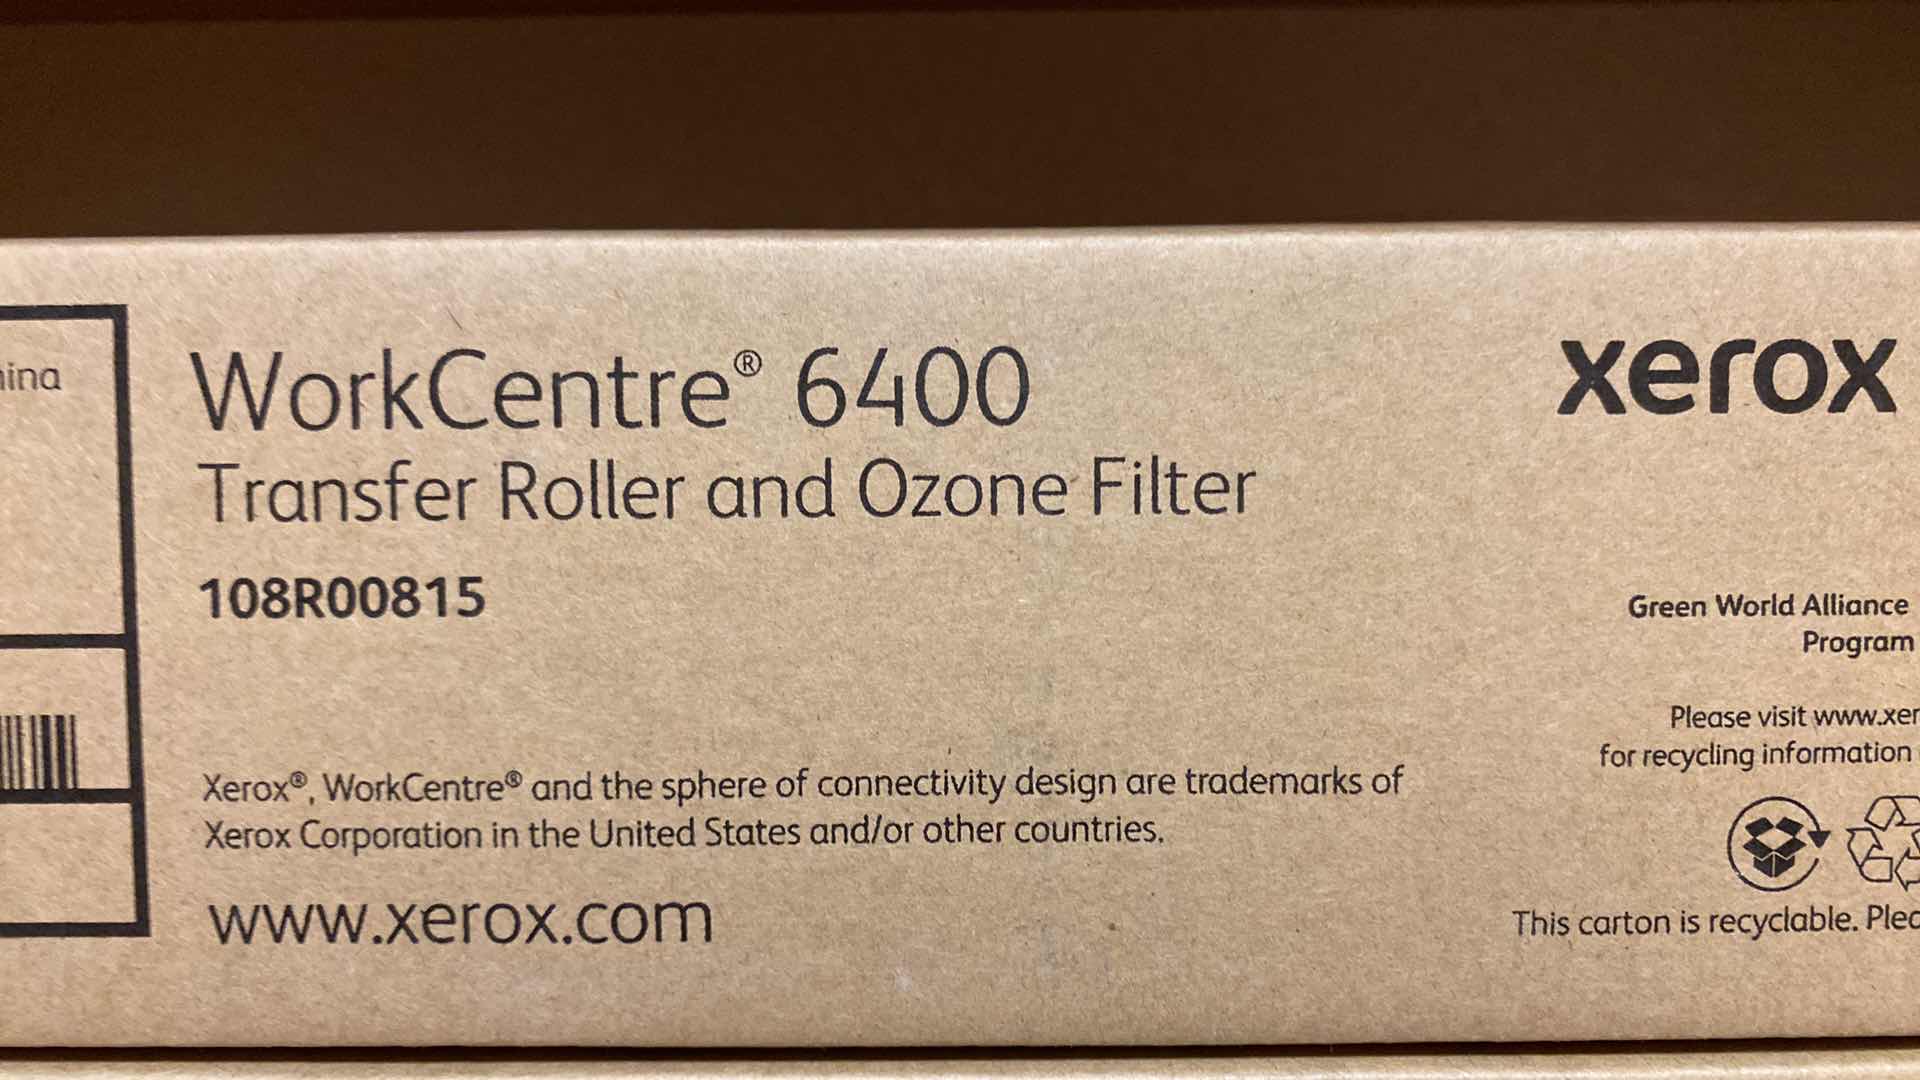 Photo 3 of NEW IN BOX 6-XEROX WORK CENTRE TRANSFER ROLLER AND OZONE FILTERS #108R00815